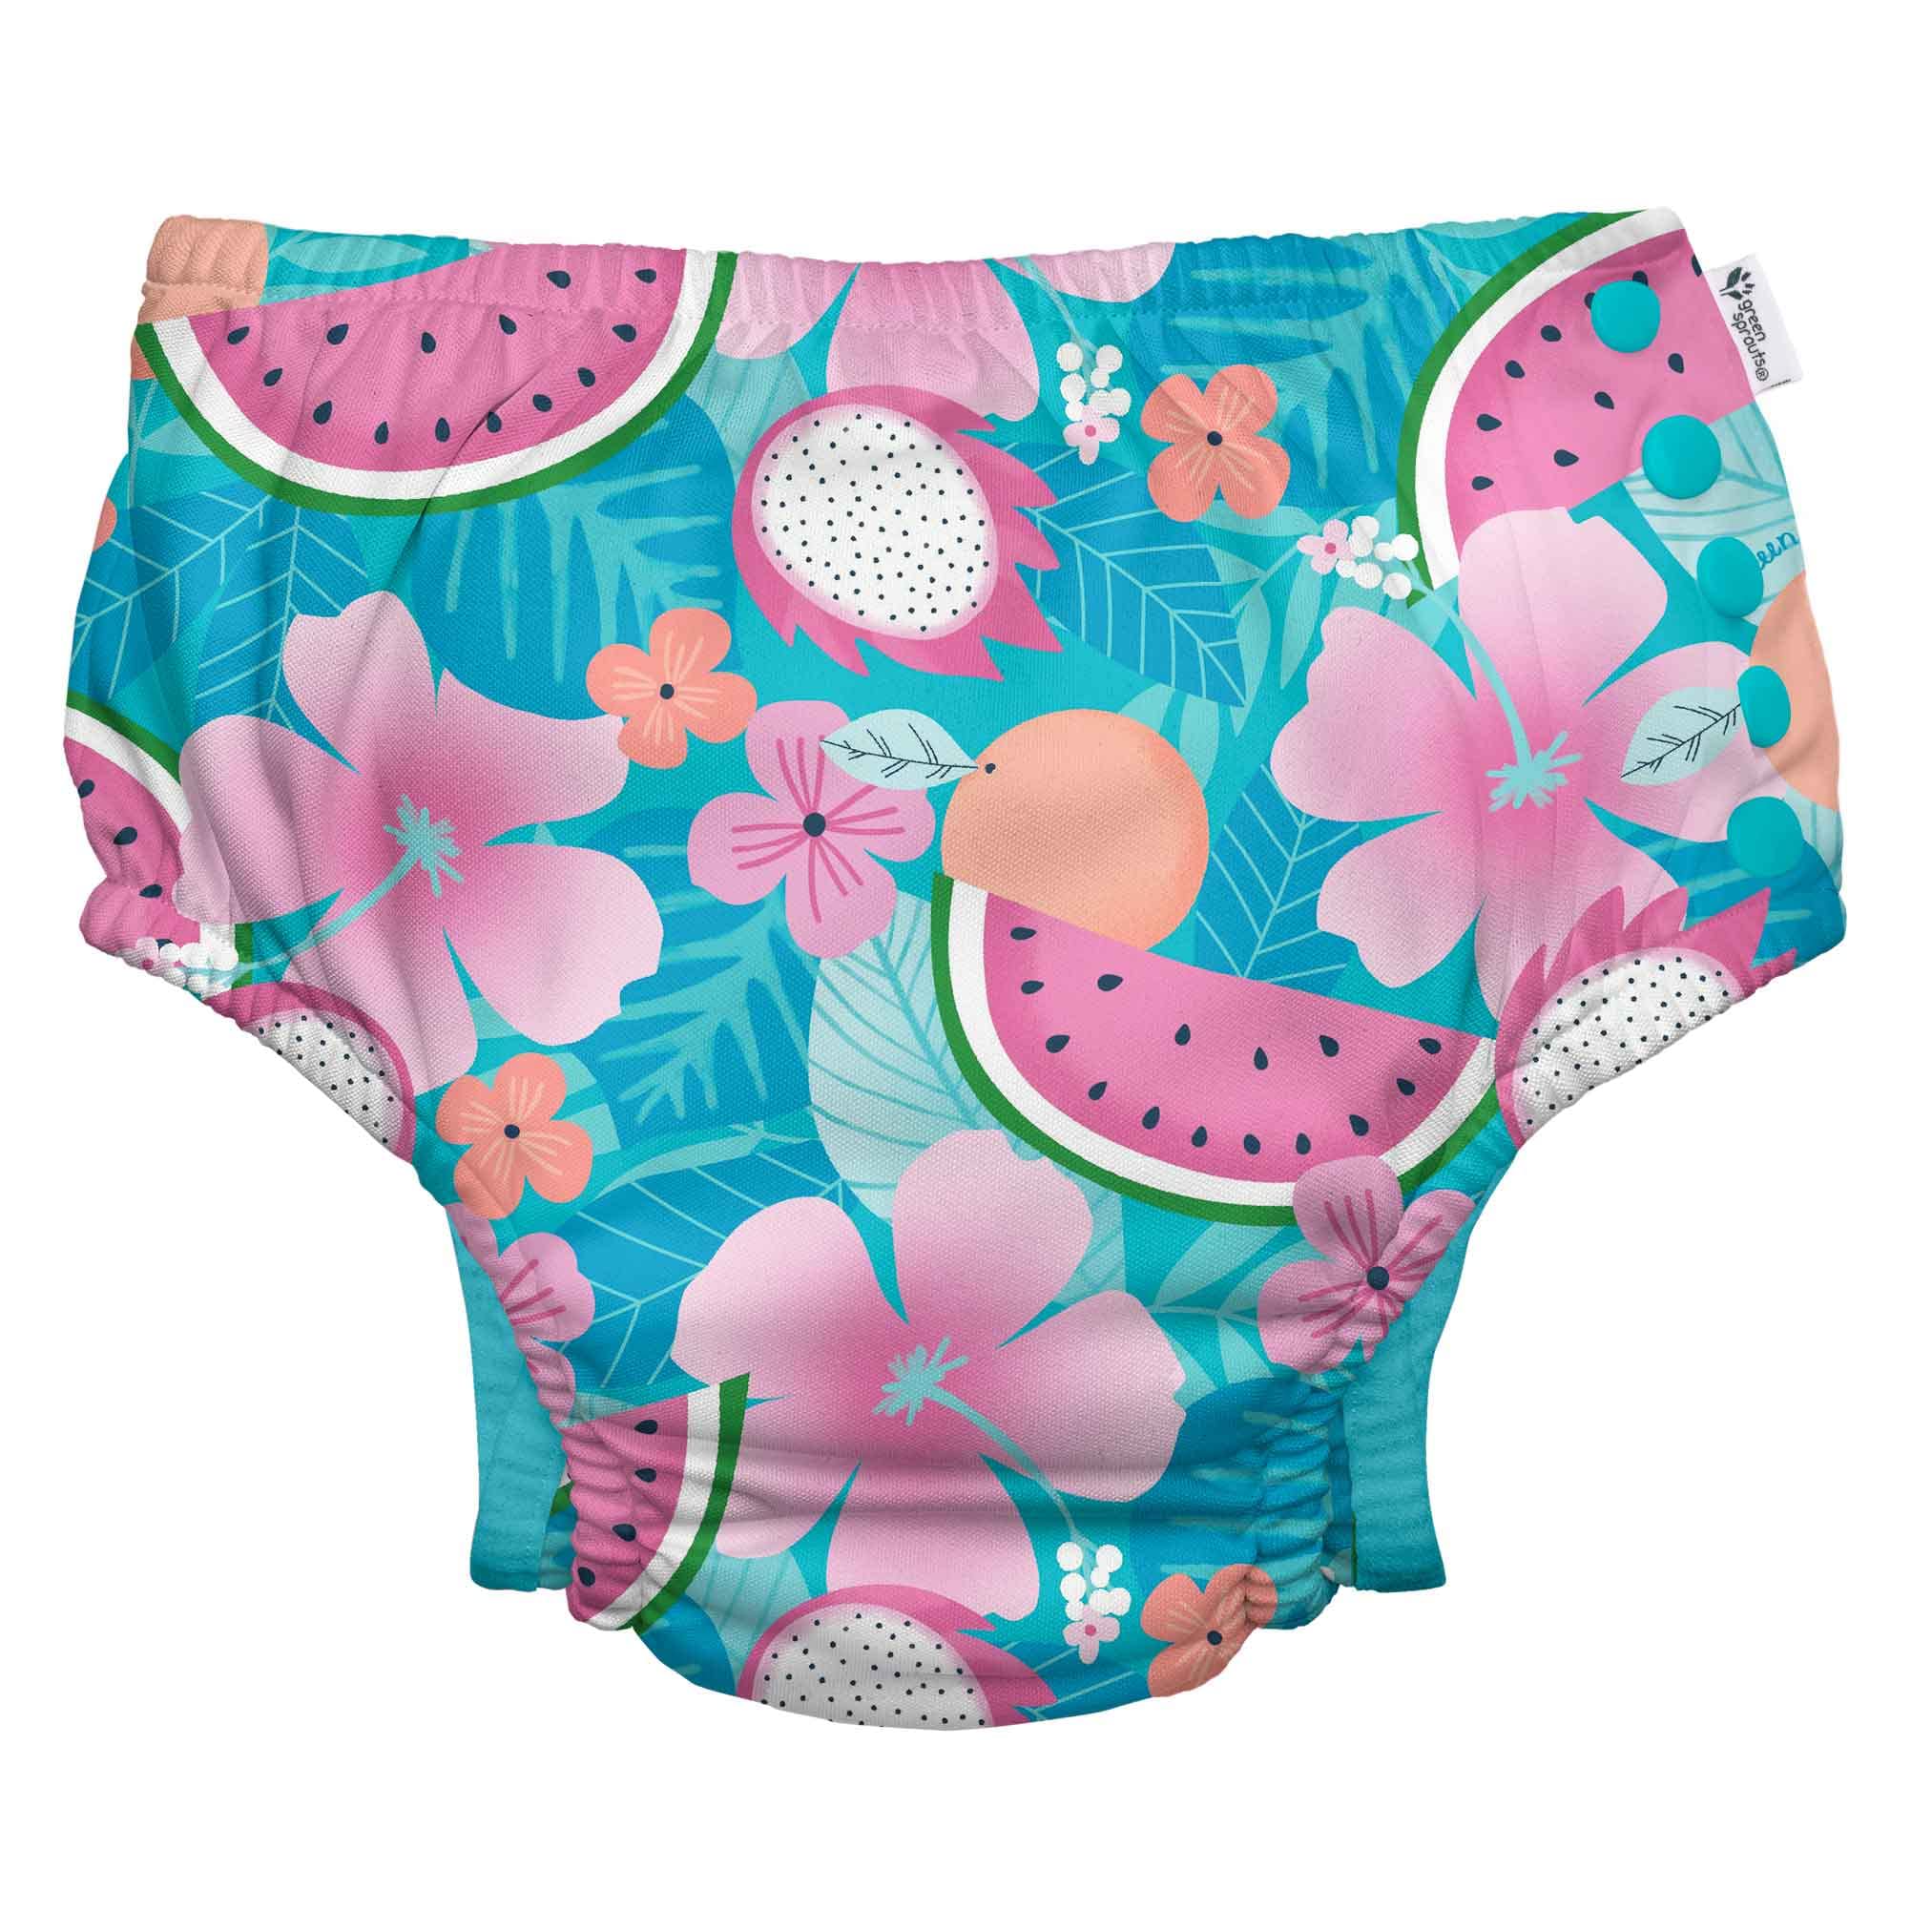 i play. by green sprouts Reusable, Eco Snap Swim Diaper with Gussets, UPF 50, Patented Design, STANDARD 100 by OEKO-TEX Certified - Aqua Tropical Fruit Floral - 12 mo